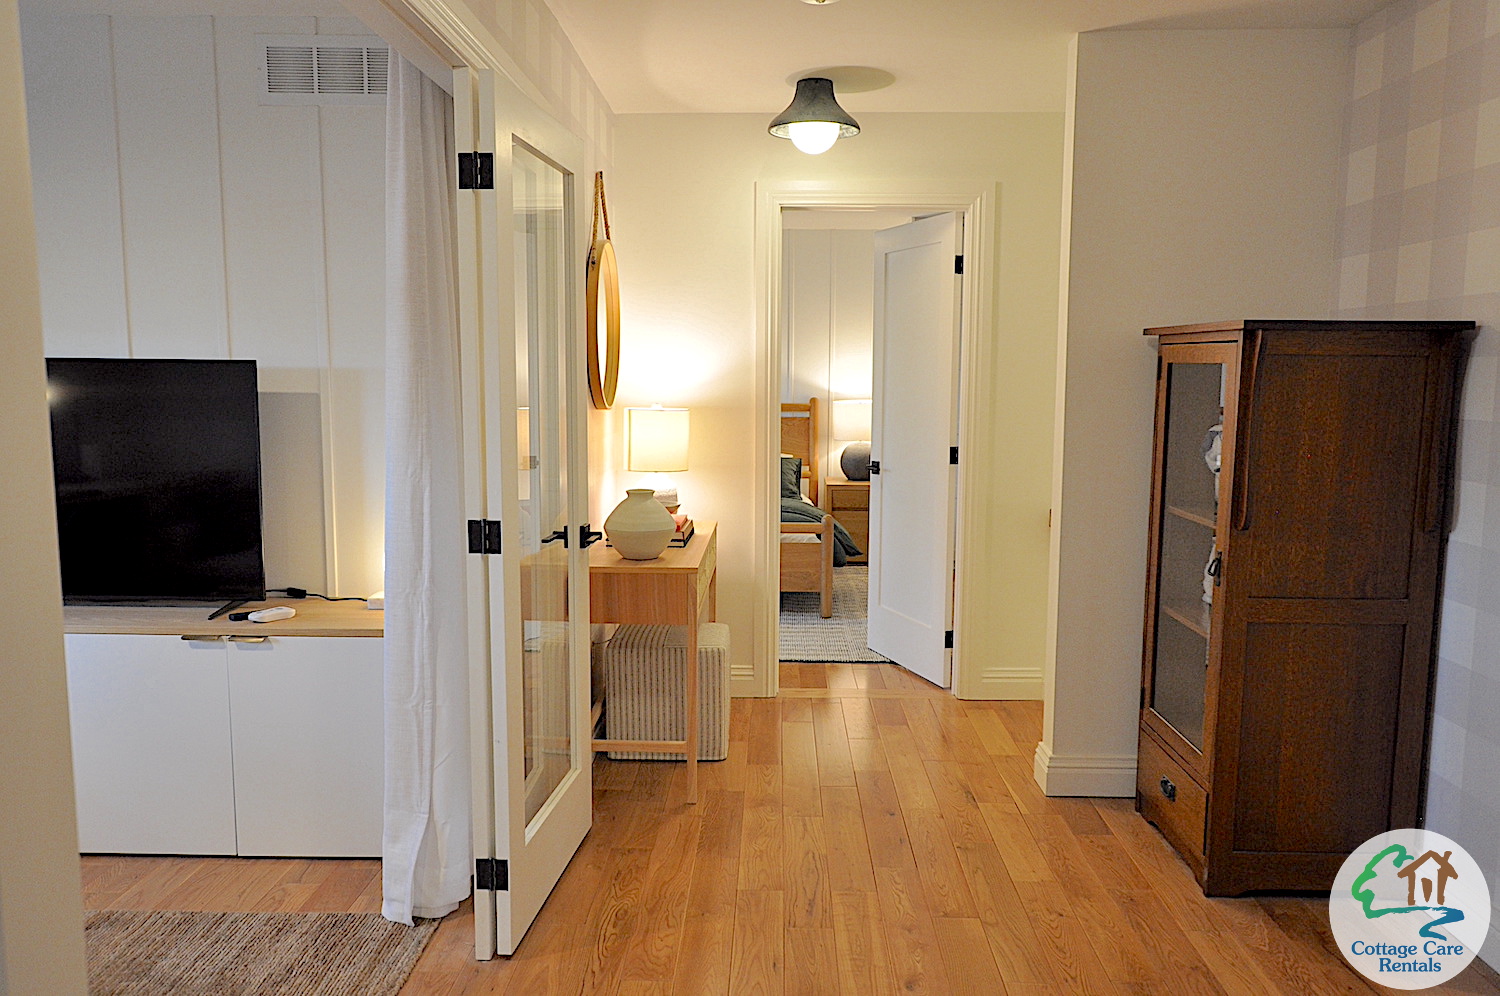 Oblong Beach House - Hallway upstairs - Bathroom to the right